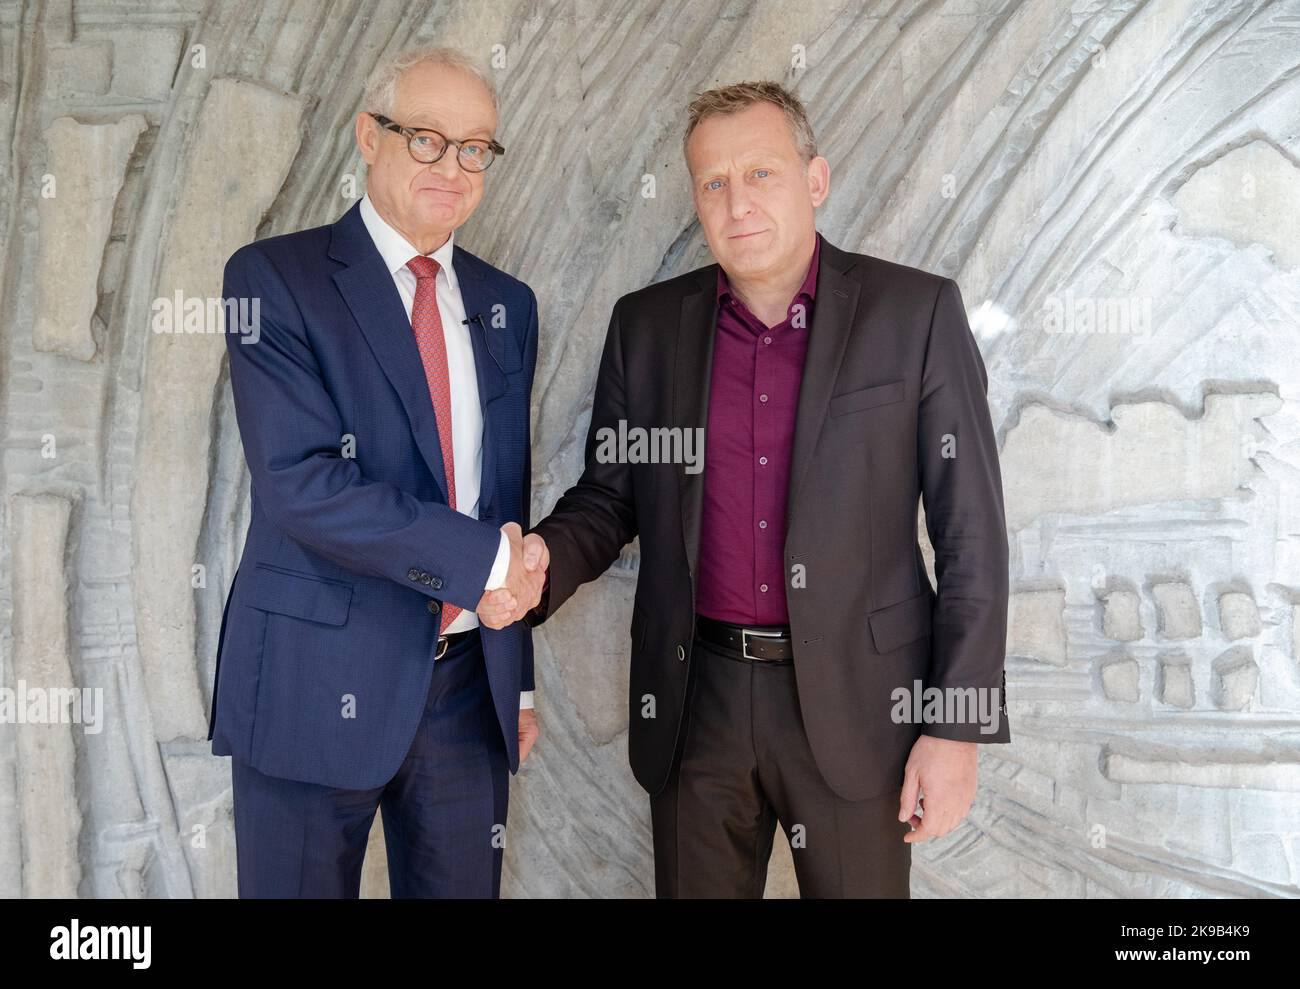 27 October 2022, Baden-Württemberg, Böblingen: Before the start of further collective bargaining in the metal and electrical industry, Harald Marquardt (l), negotiator for Südwestmetall, shakes hands with Roman Zitzelsberger, district manager and negotiator for IG Metall Baden-Württemberg. Photo: Christoph Schmidt/dpa Stock Photo